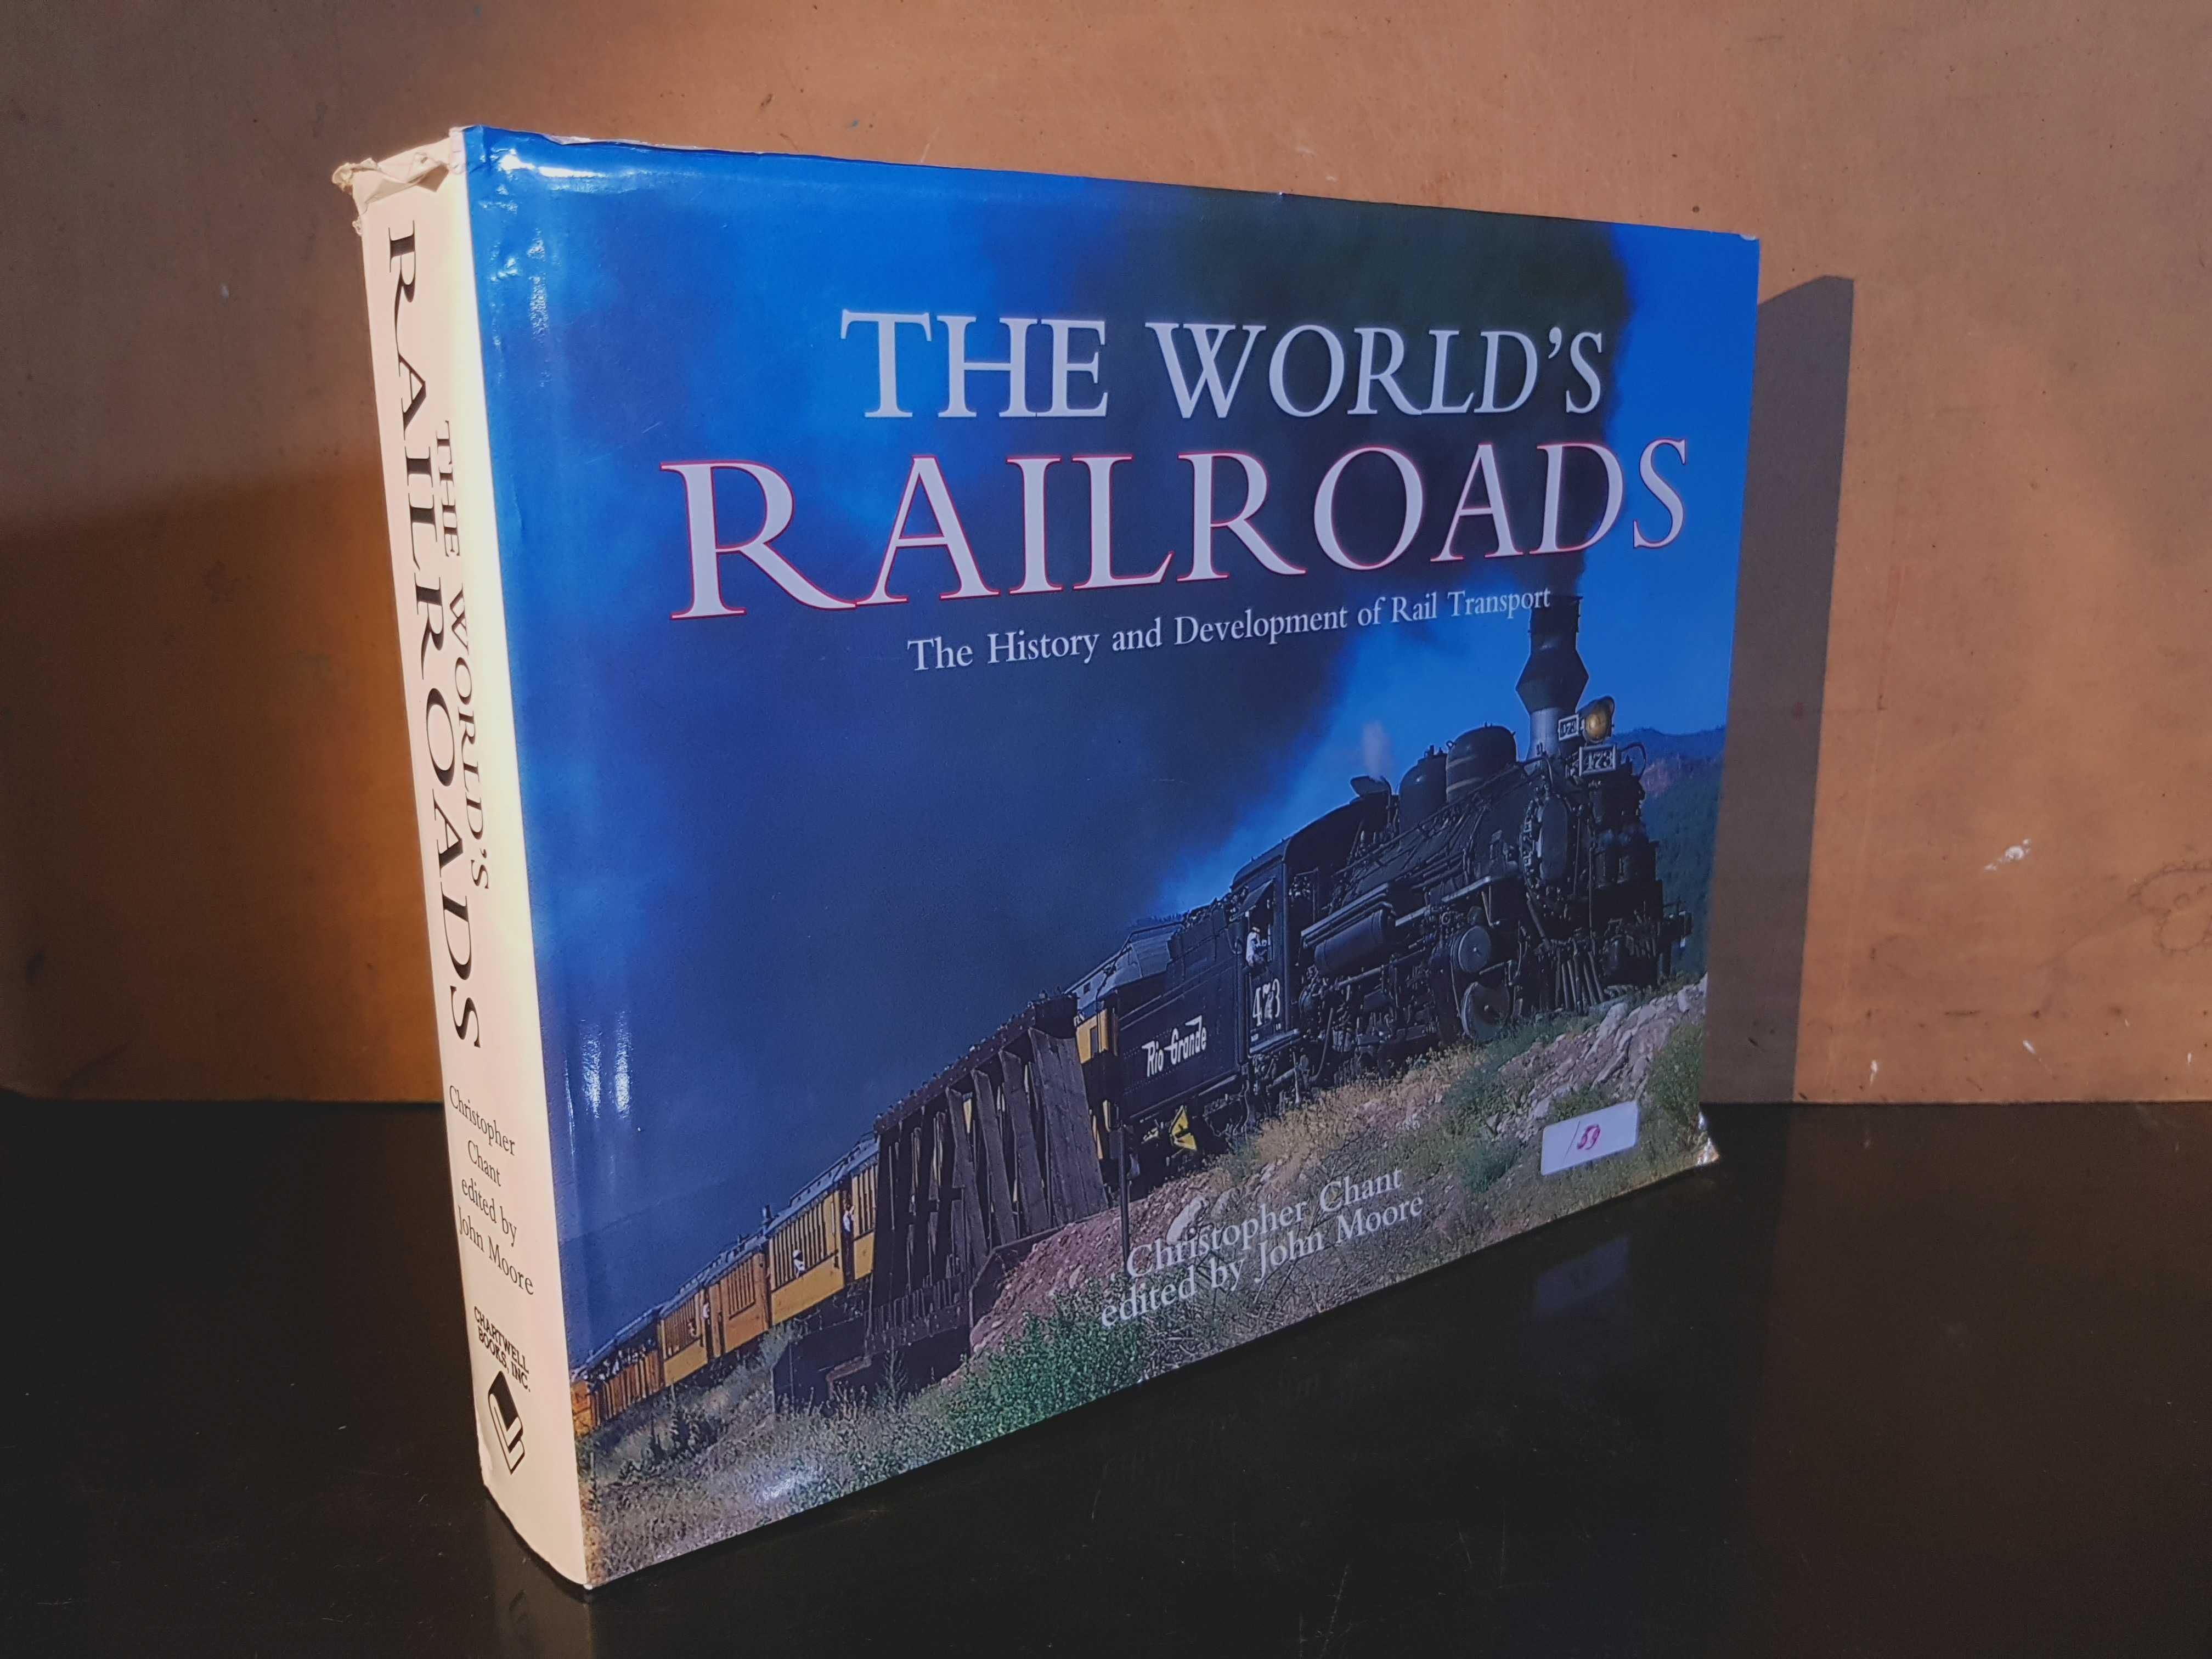 The World's Railroads - The History and Development of Rail Transport